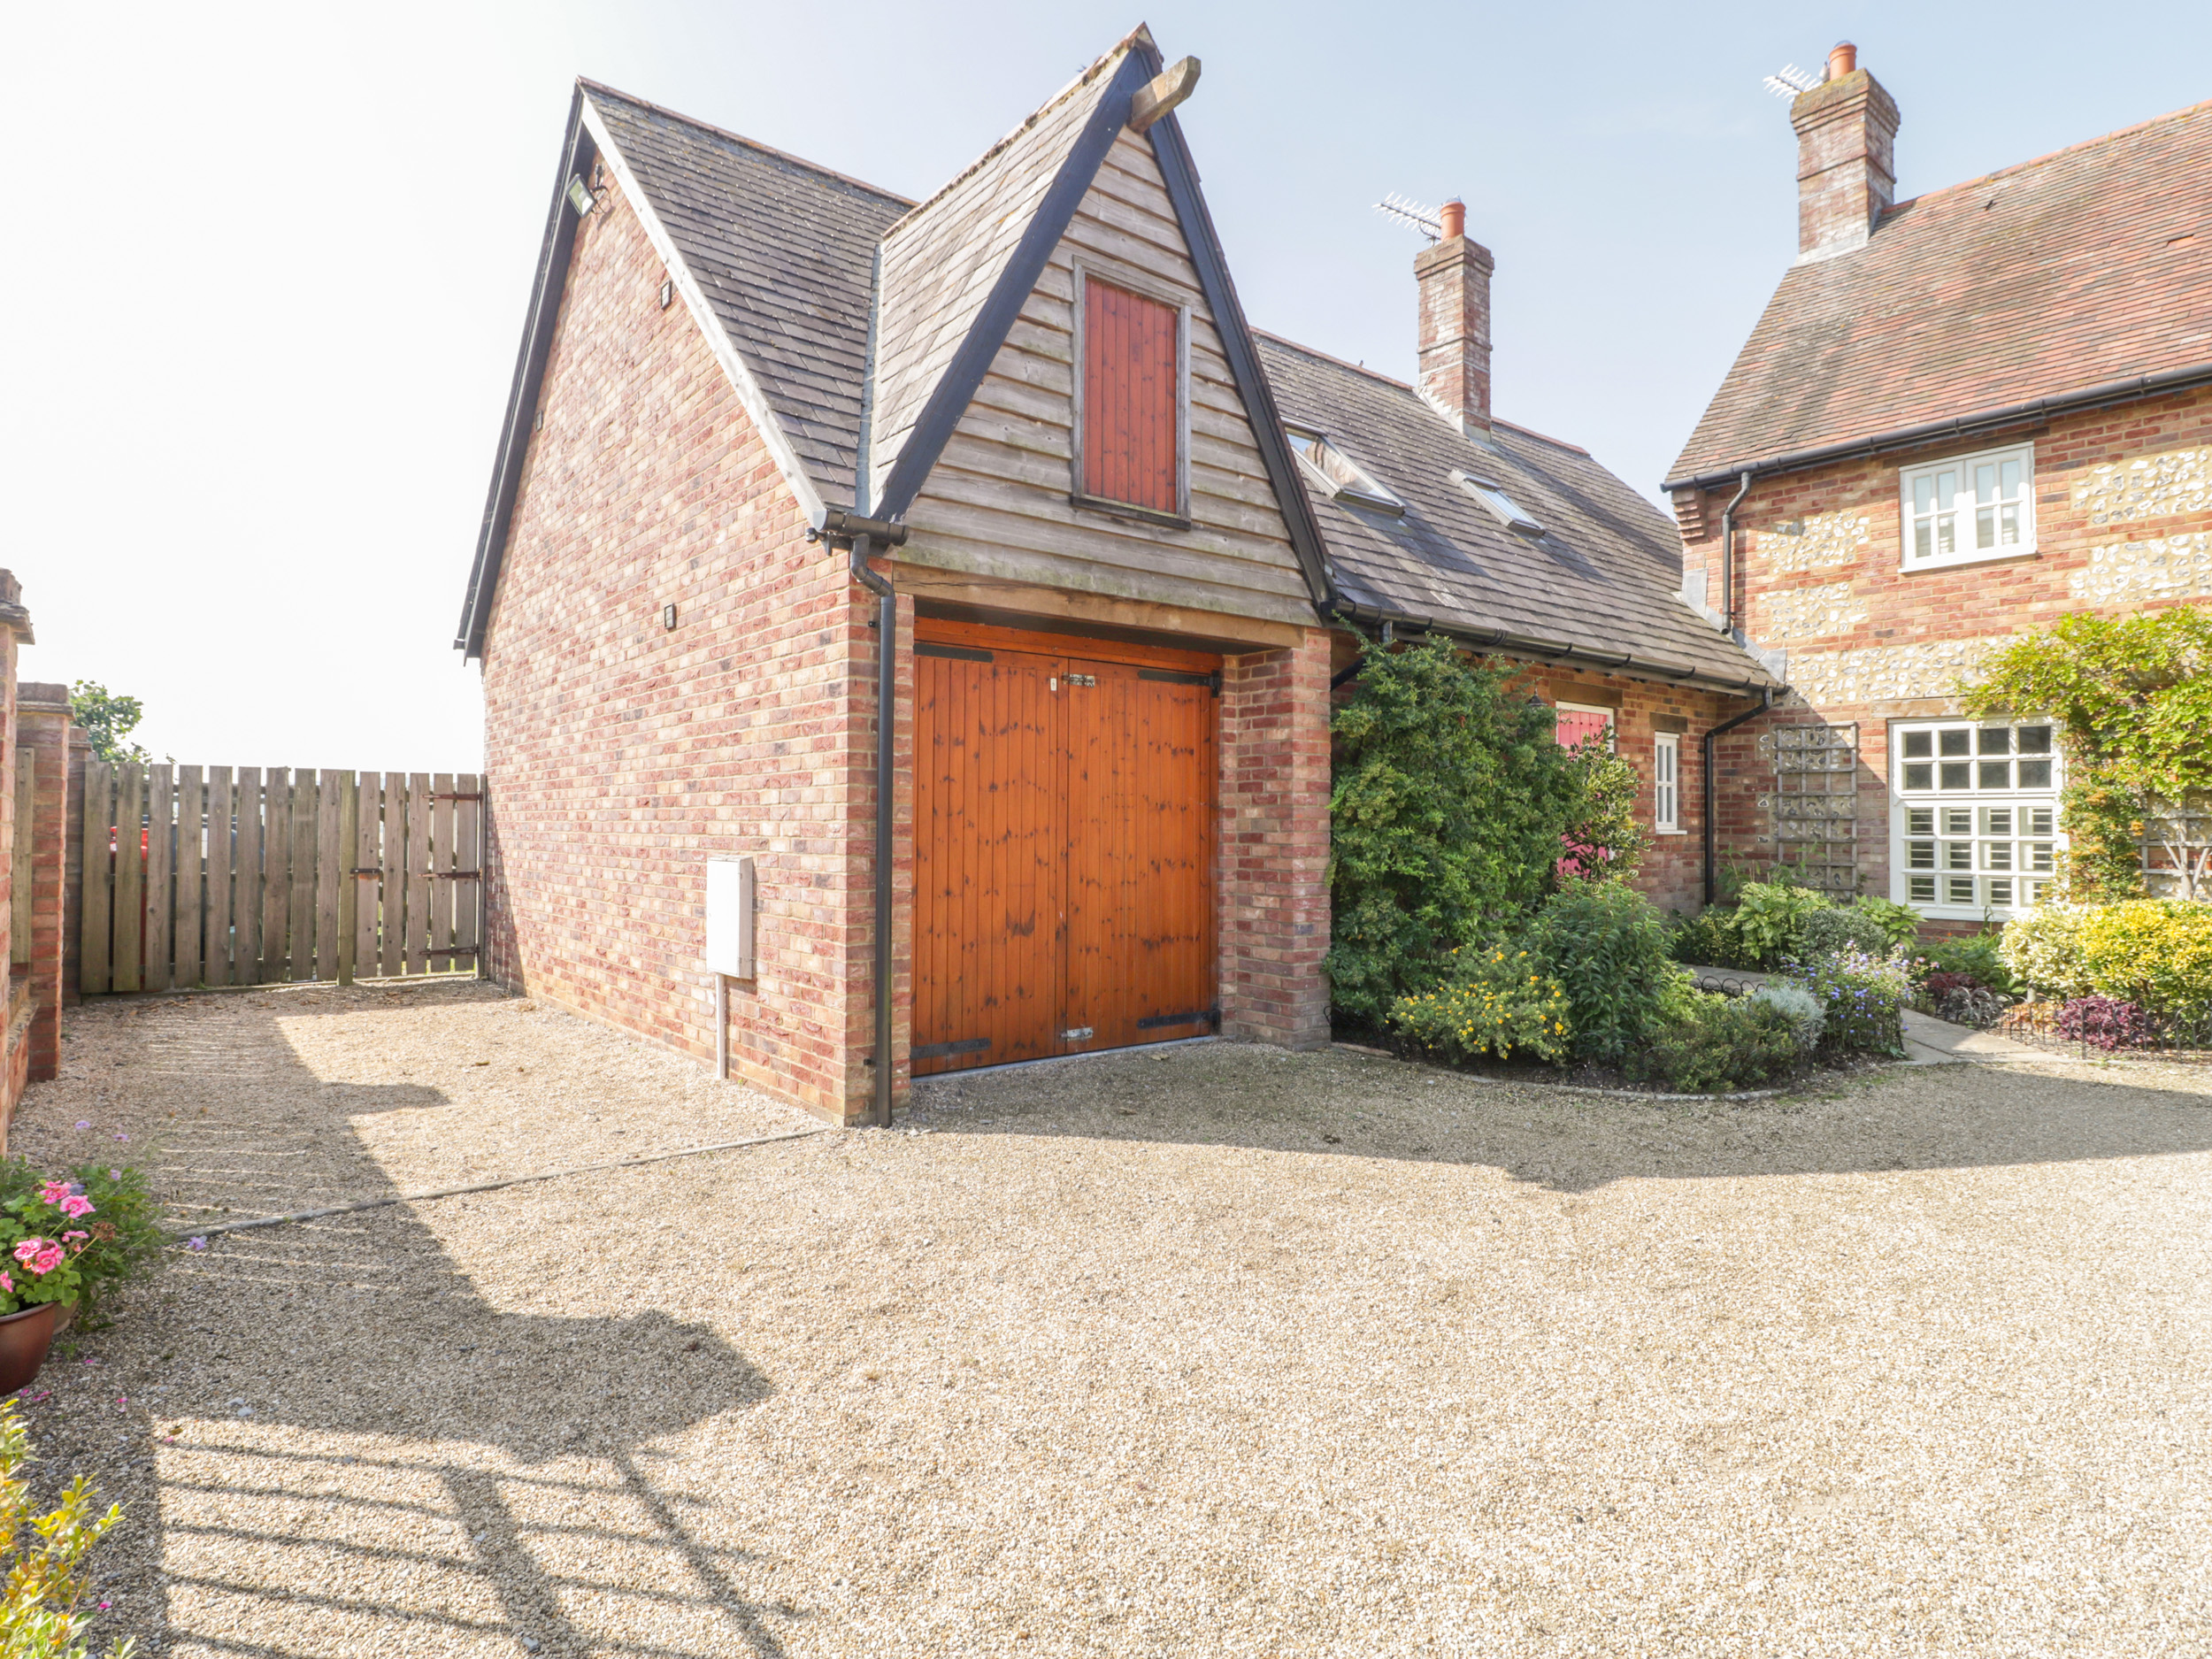 Holiday Cottages To Rent In Dorset Last Minute Cottages